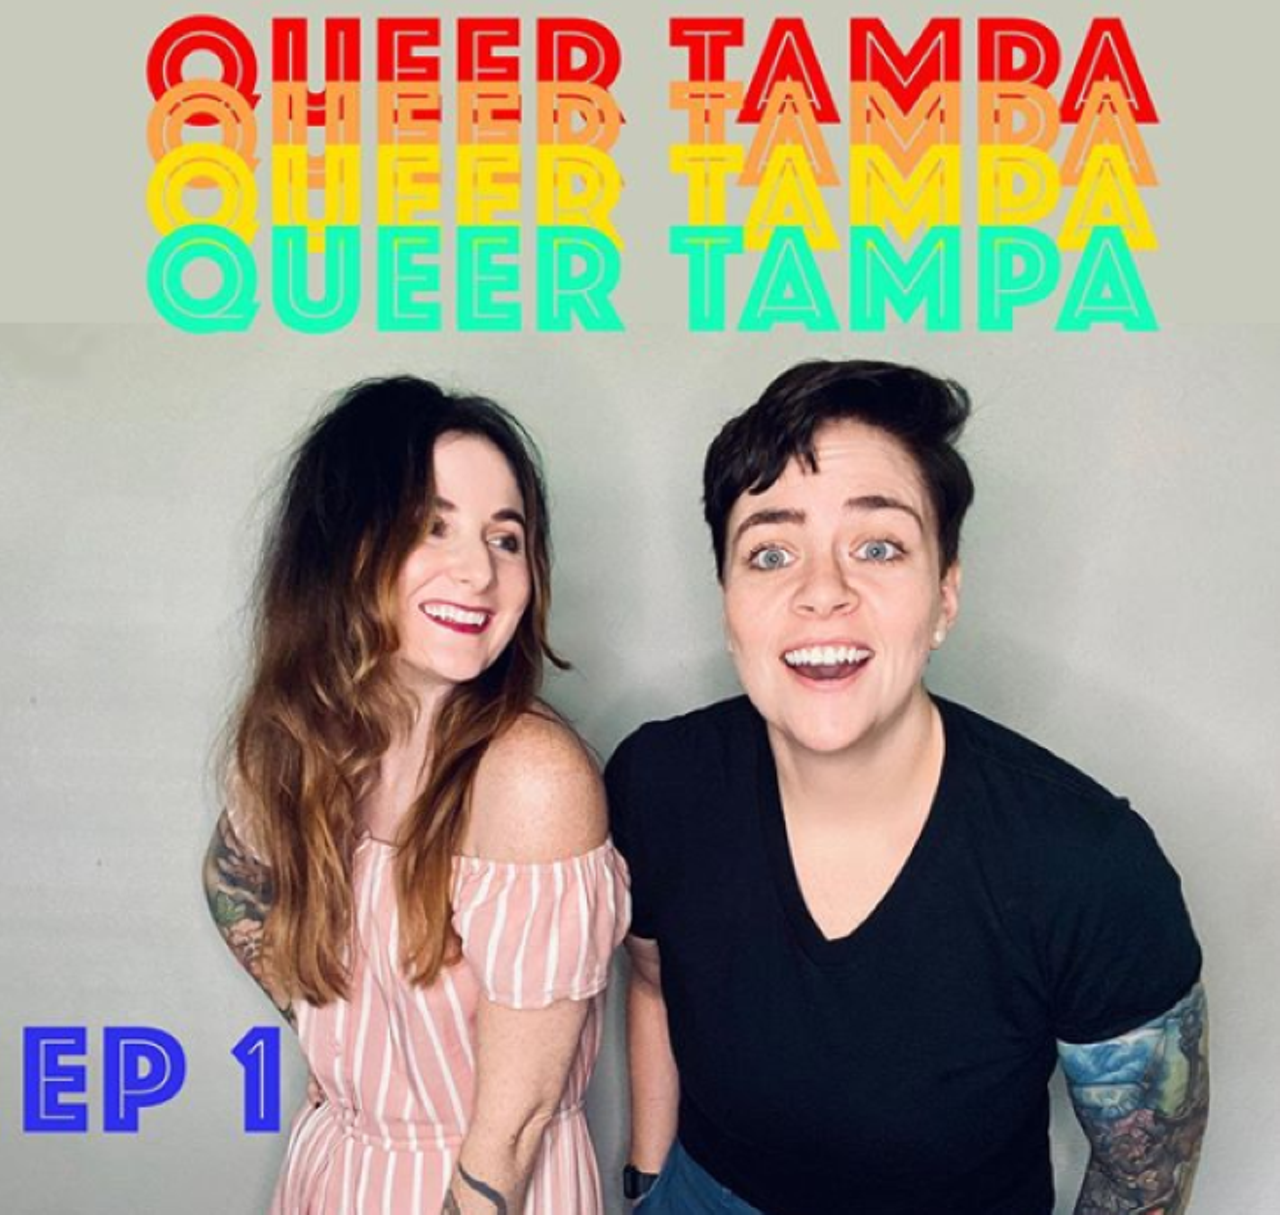 Queer Tampa
Ren and Jai Lopa host this podcast about queer issues in Tampa Bay, but also bring it out into the real work for a quarterly happy hour so that discussion about issues that matter can happen face-to-face as well as in your earbuds.
@queertampa on Instagram 
Photo via Queer Tampa/Instagram